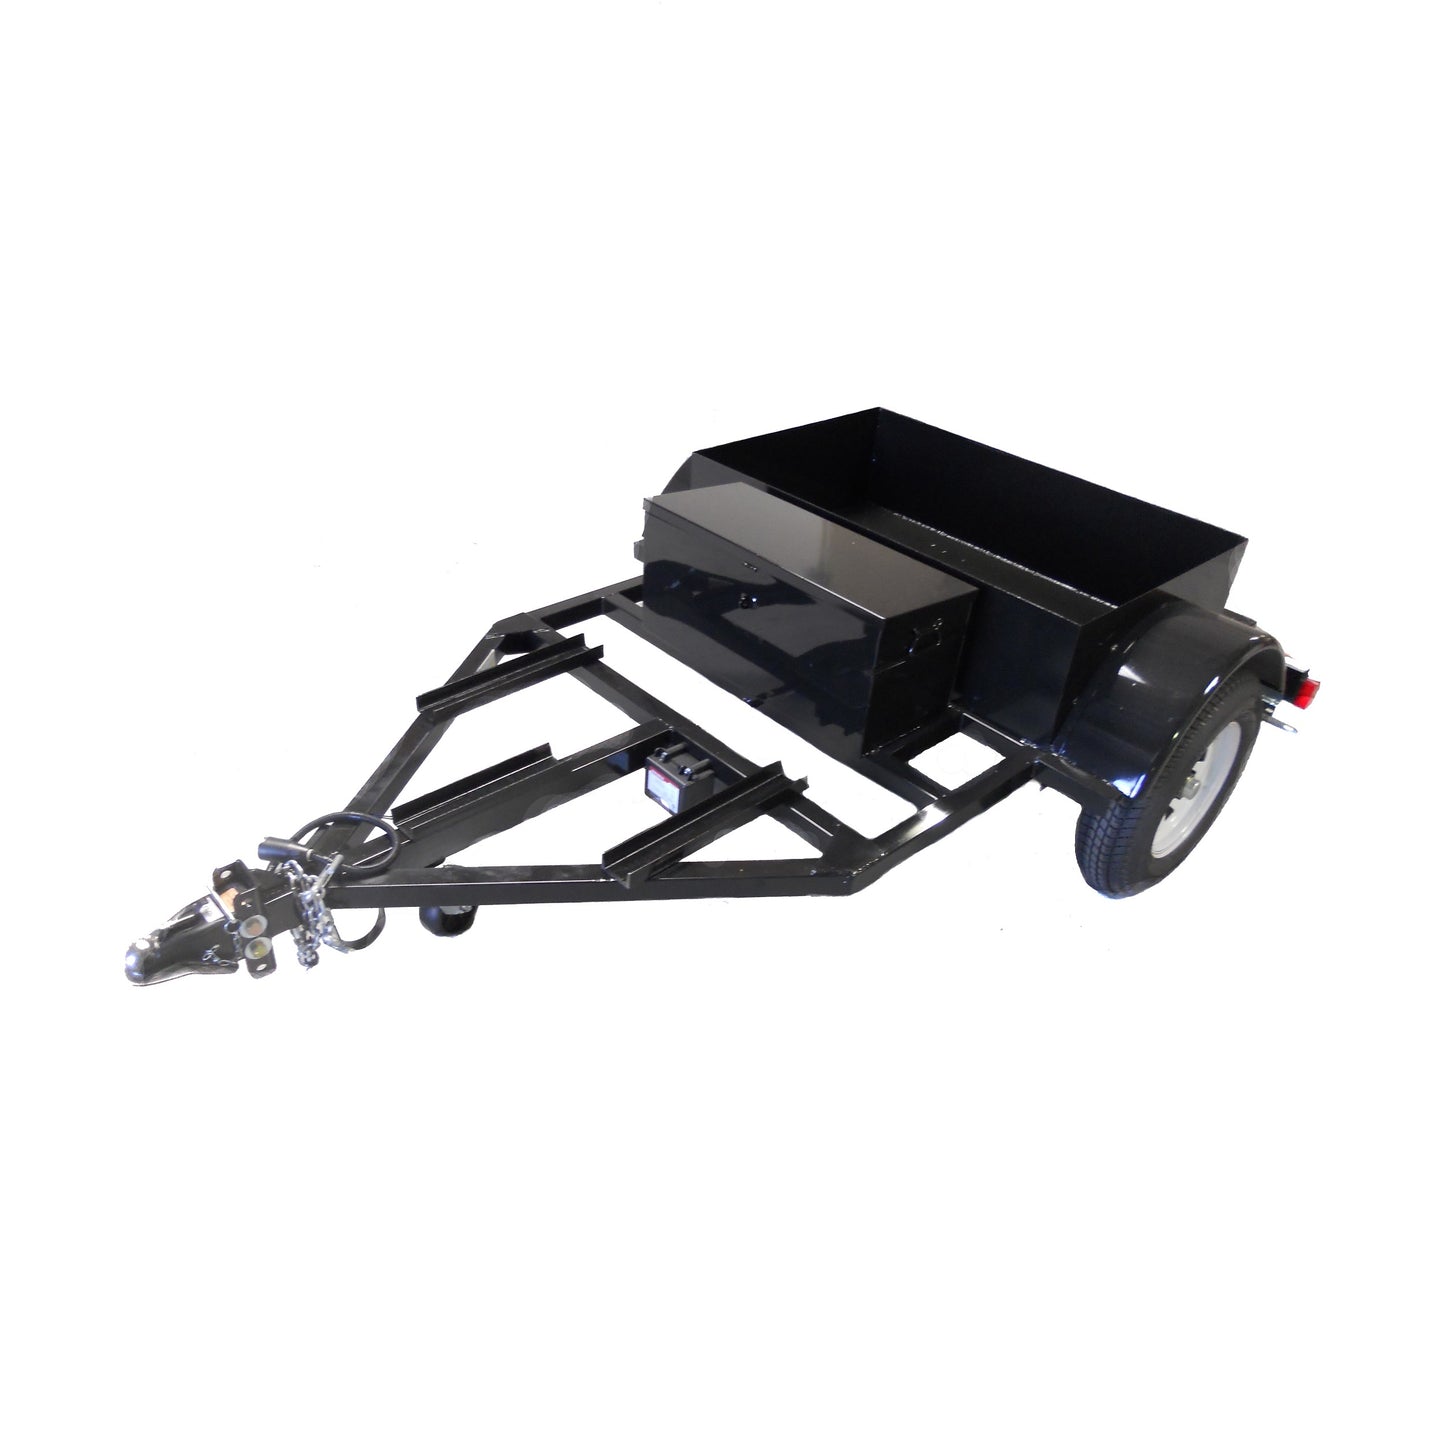 Carry All Trailer for sewer cleaning equipment